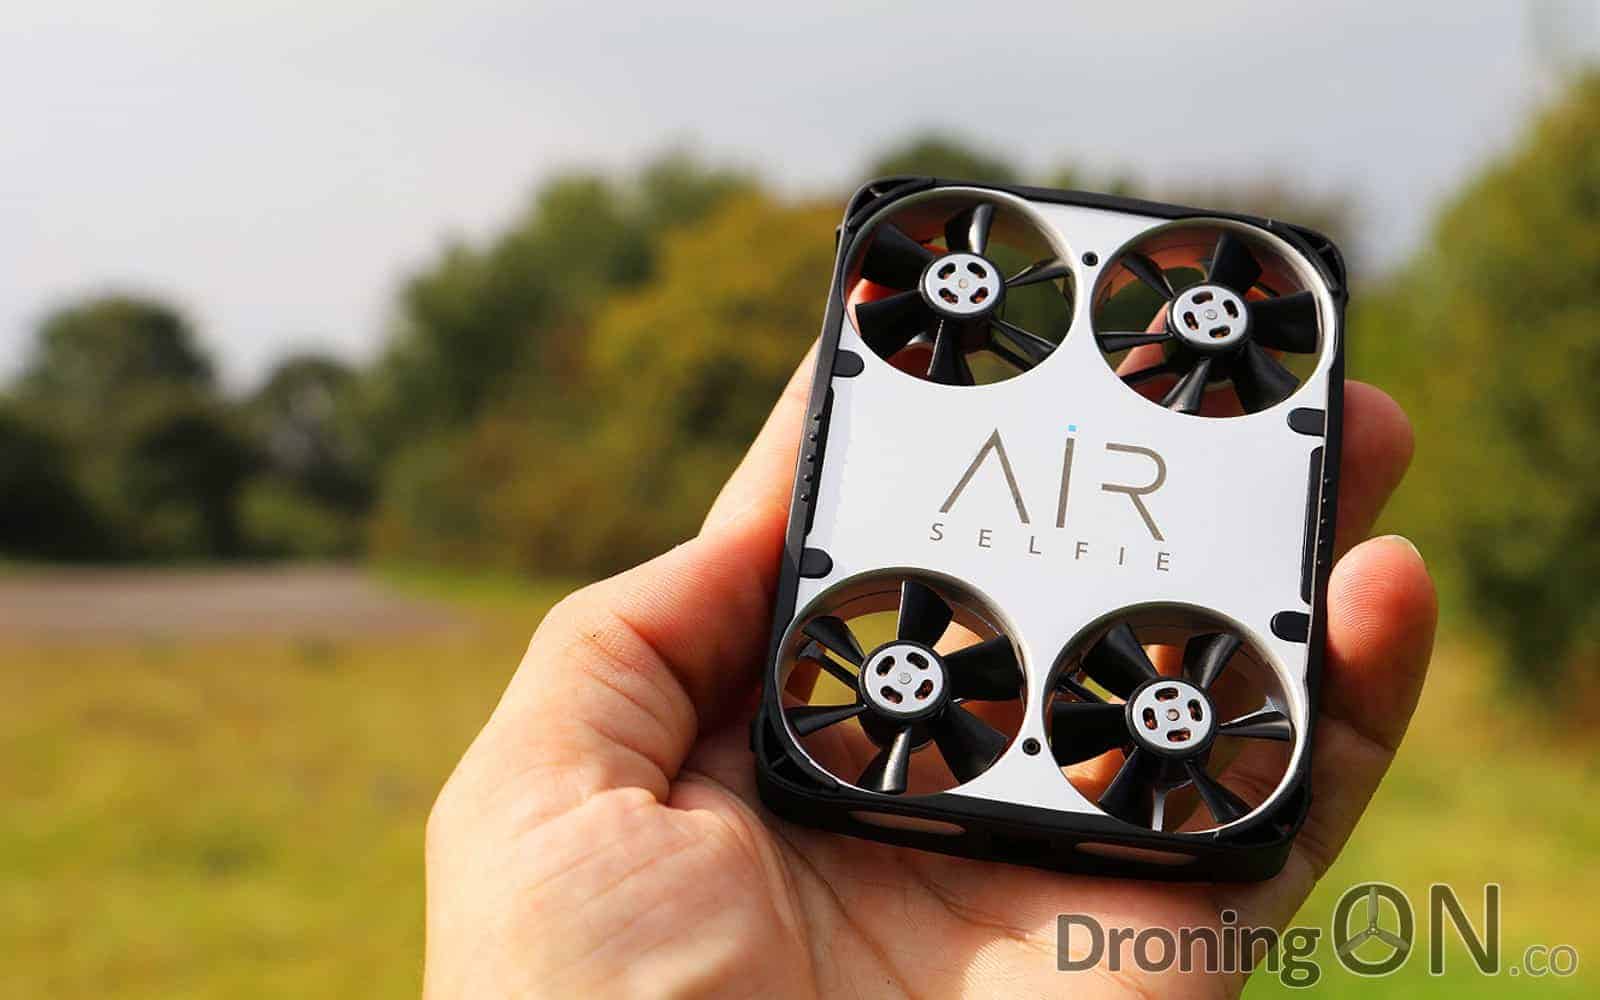 Featured the AirSelfie drone, unboxed, inspected and flight tested by DroningON.